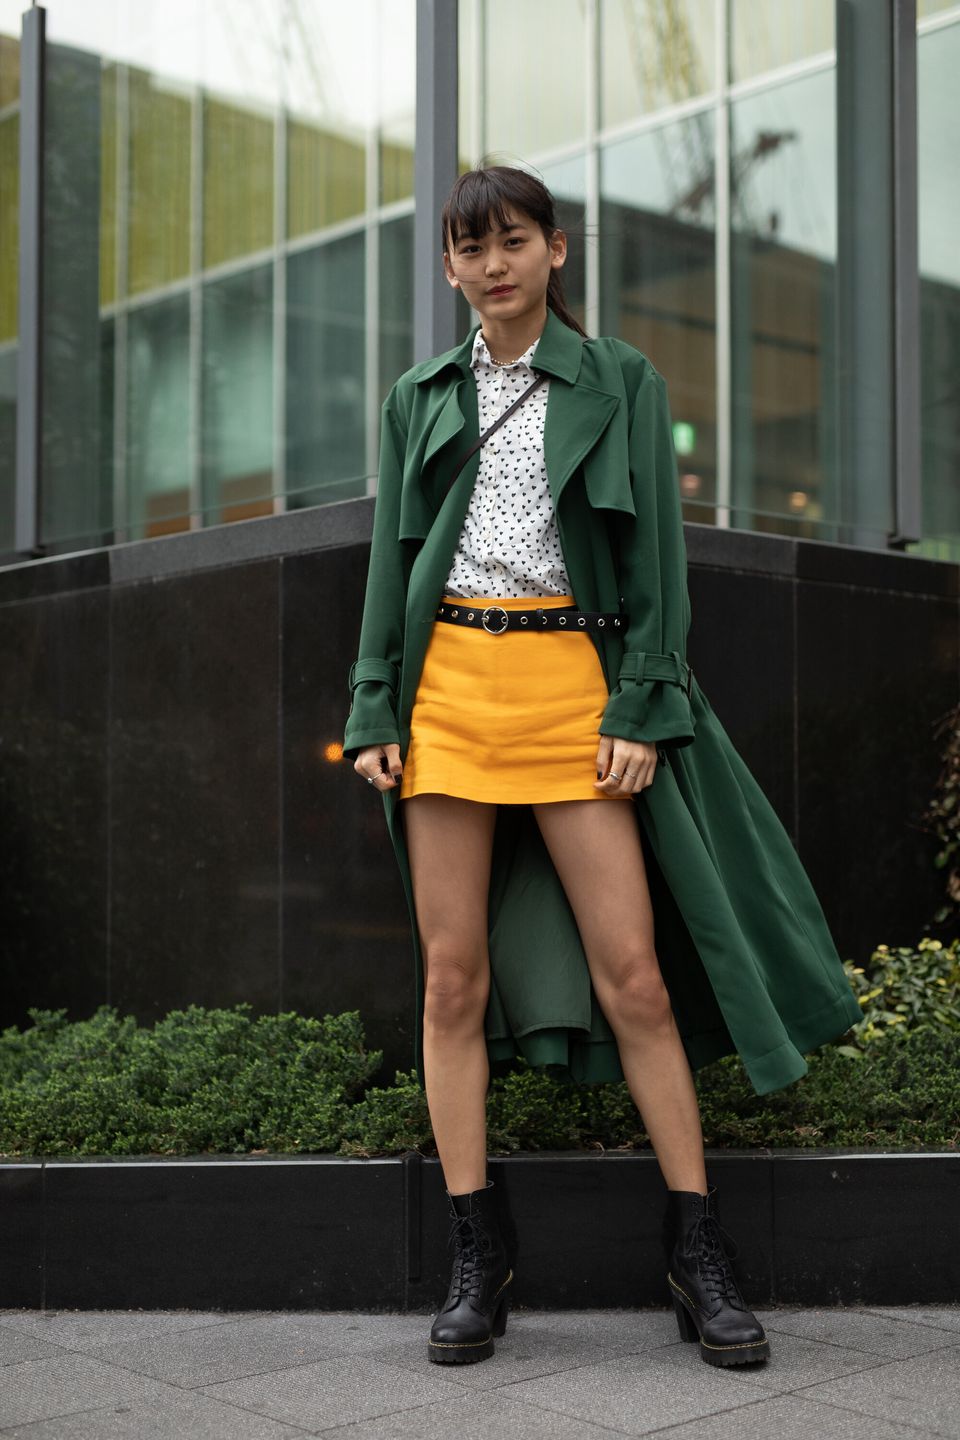 These Photos Of Tokyo Fashion Are All The Style Inspiration You Need ...